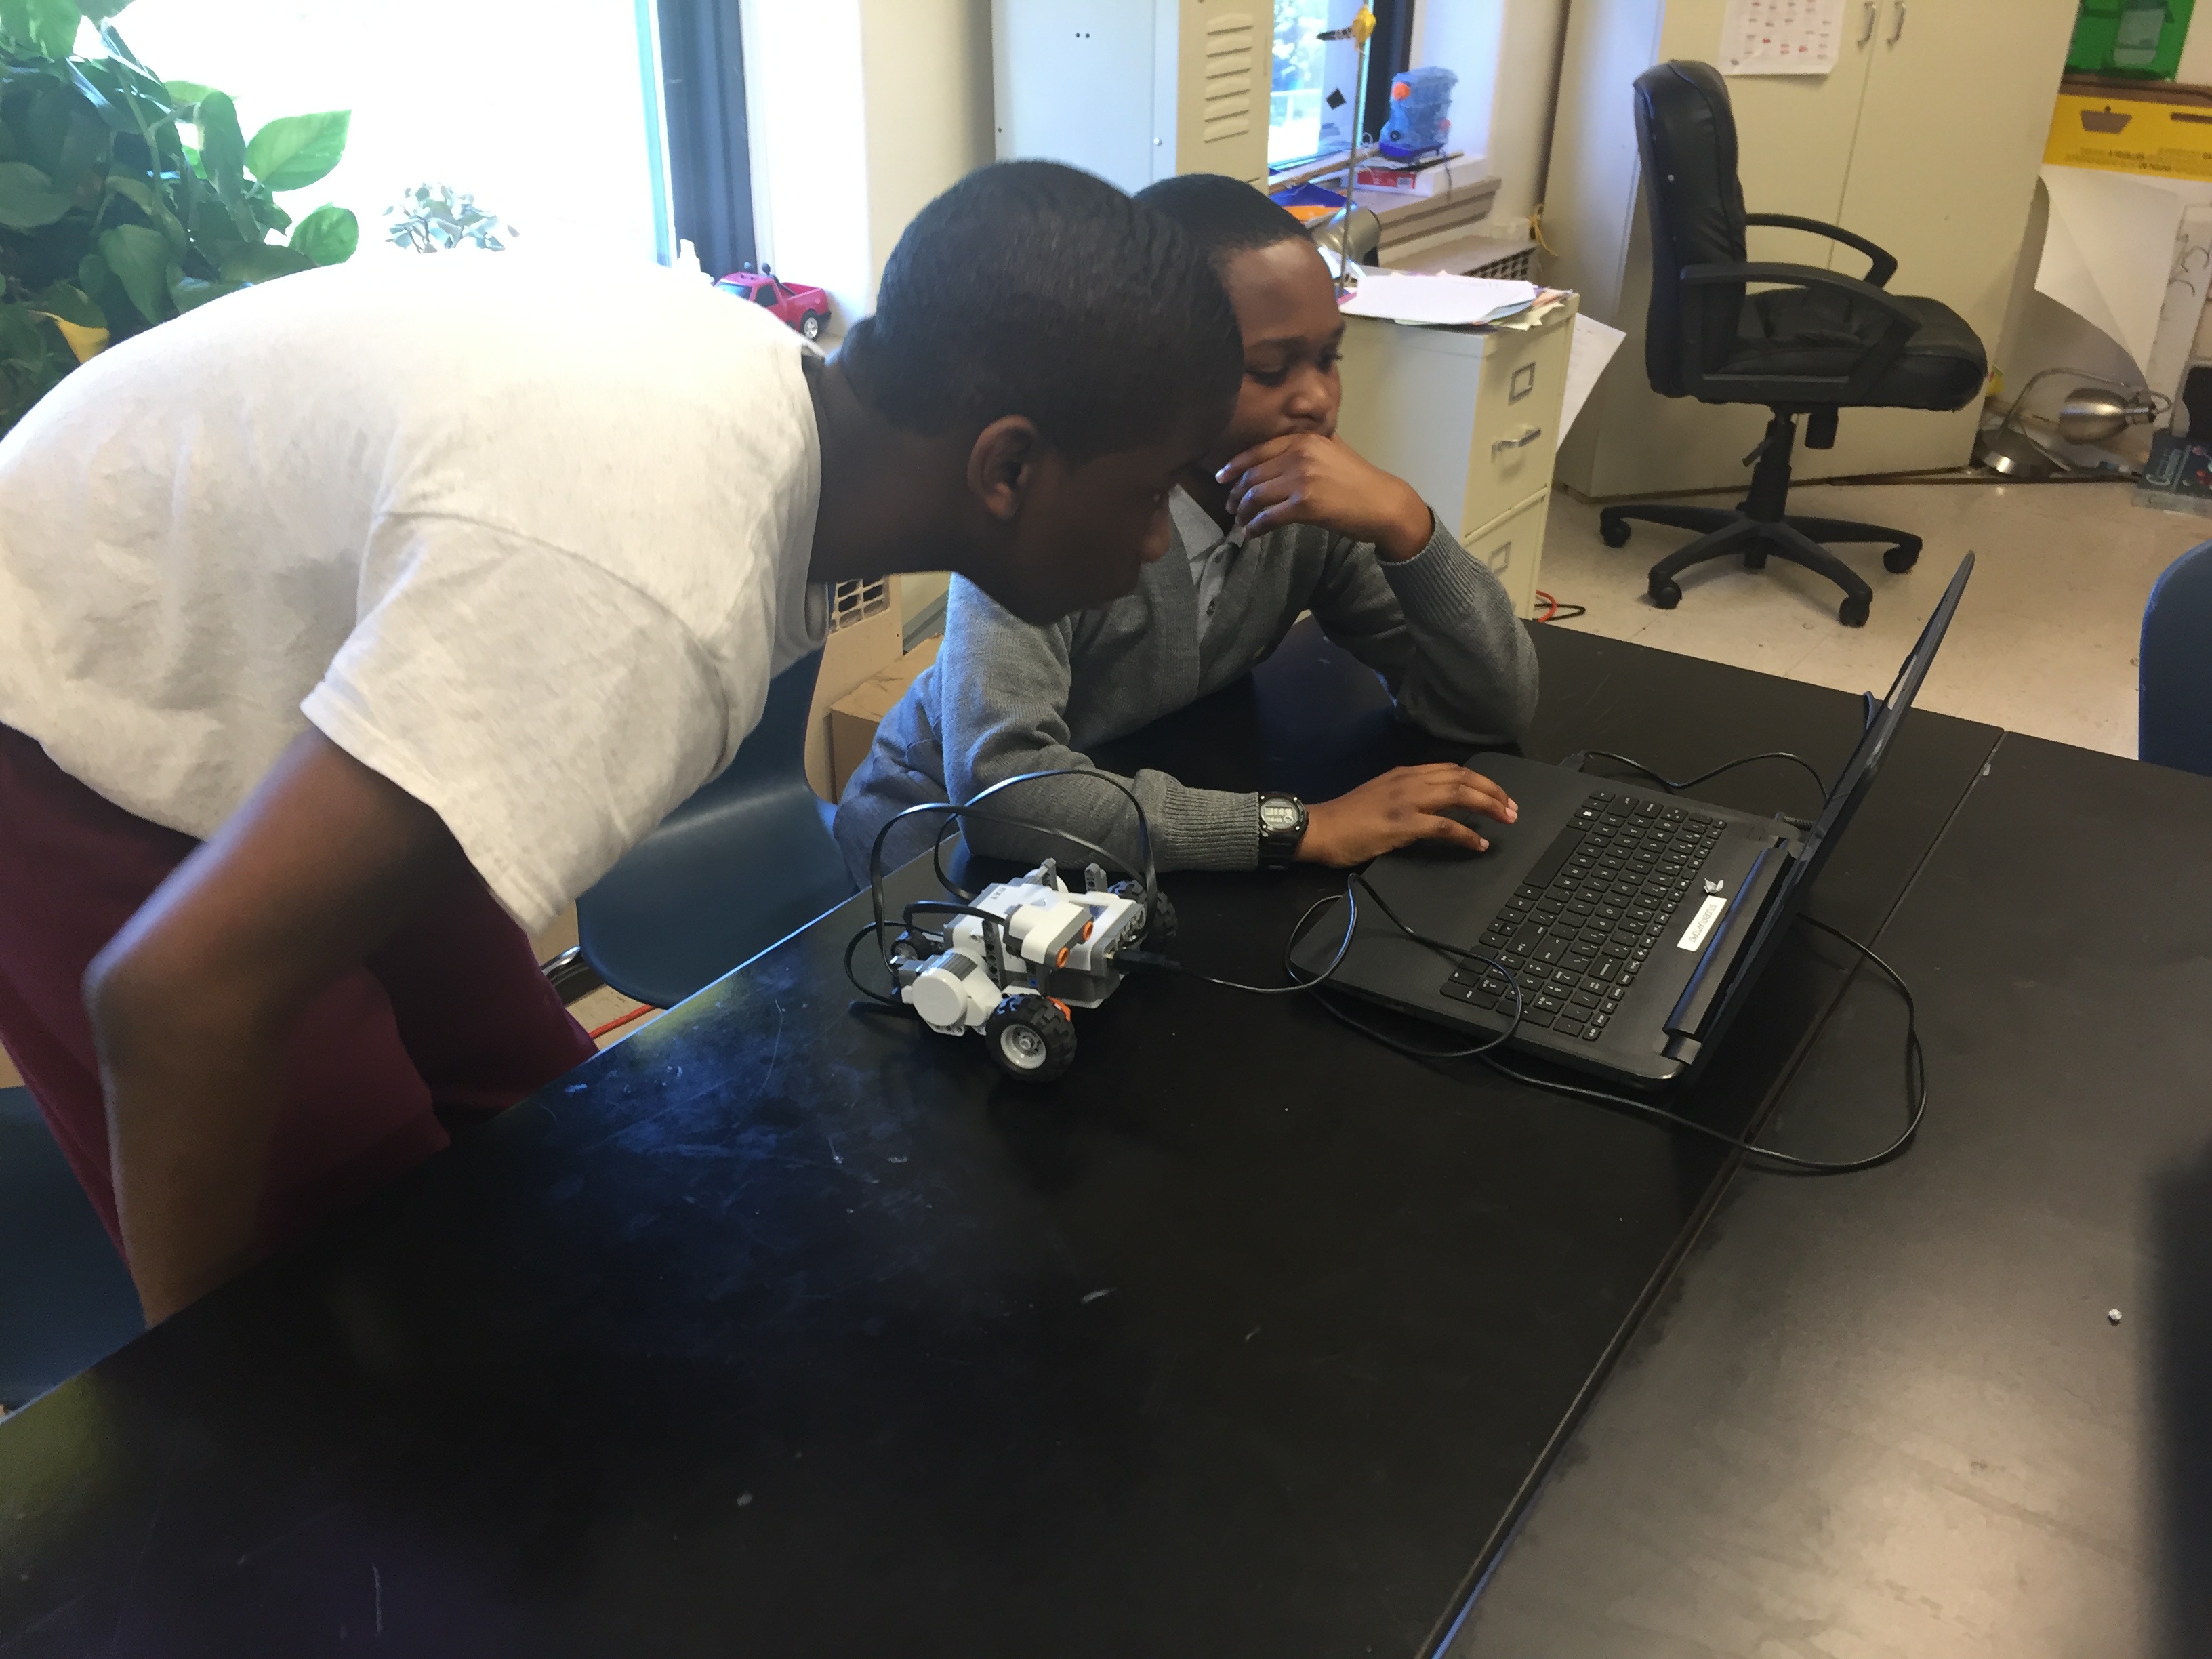 Link students code their robot during their immersion week